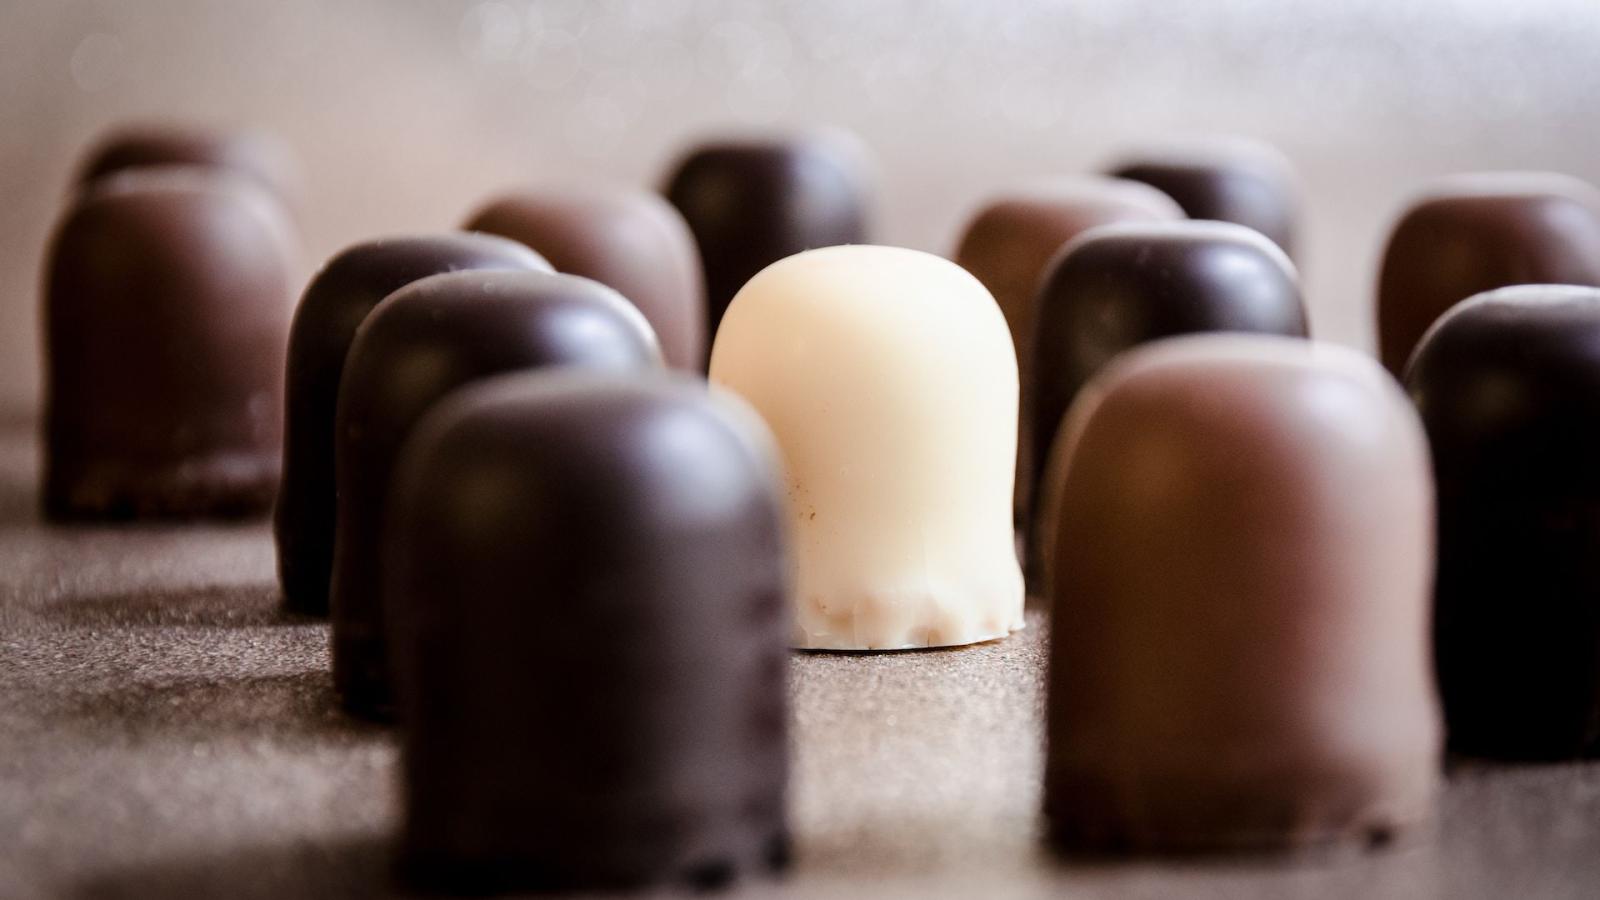 Assorted chocolates arranged on a neutral surface.